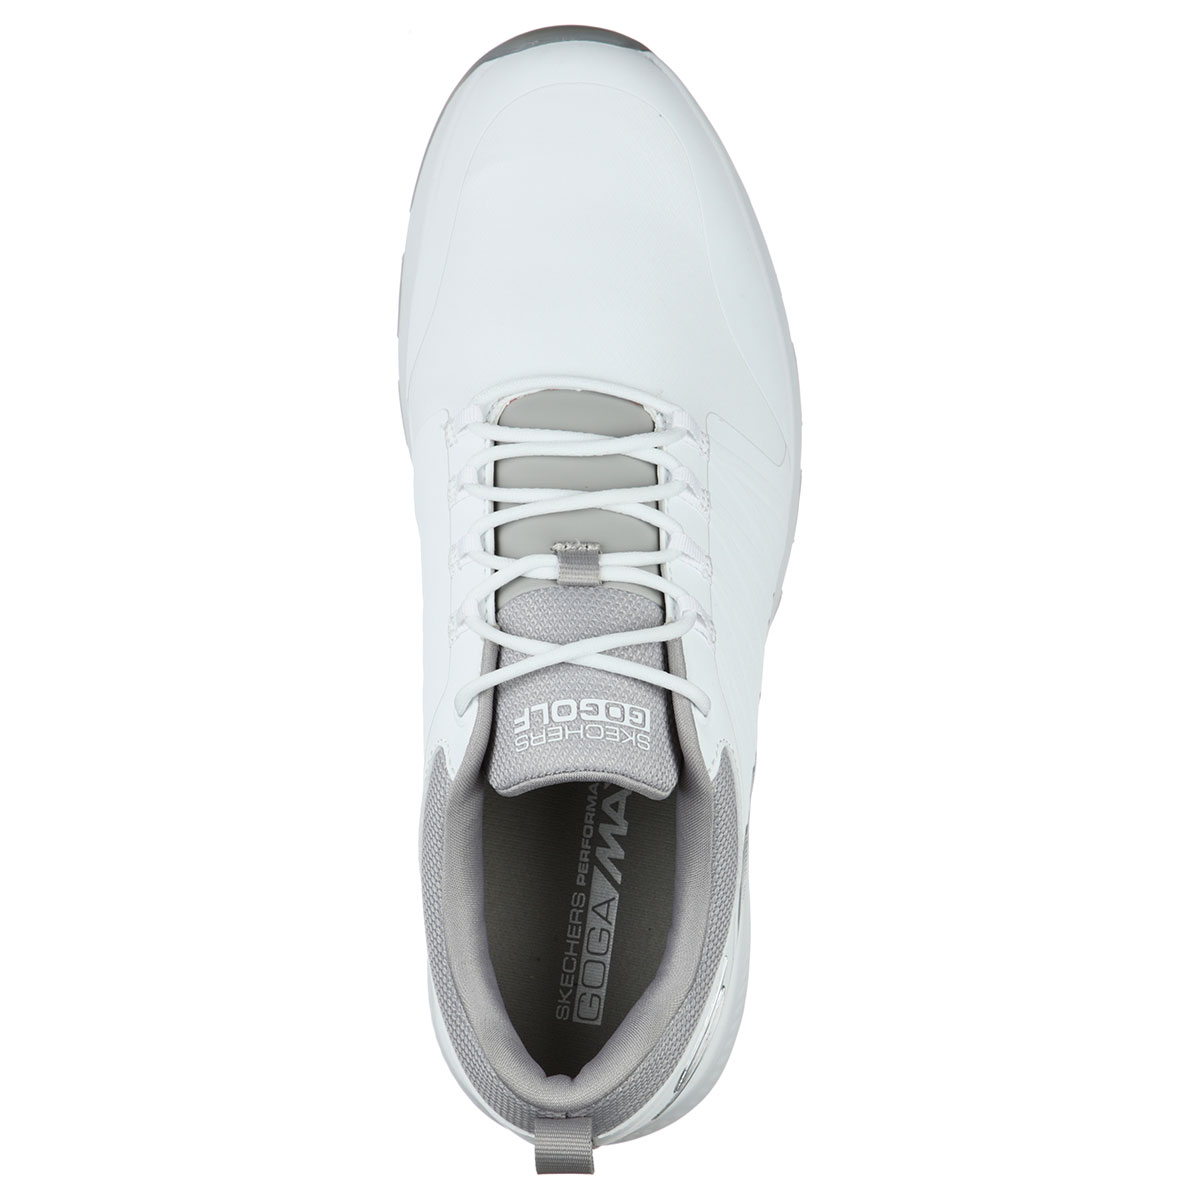 Skechers Men's Elite 4 Victory Spikeless Golf Shoes from american golf